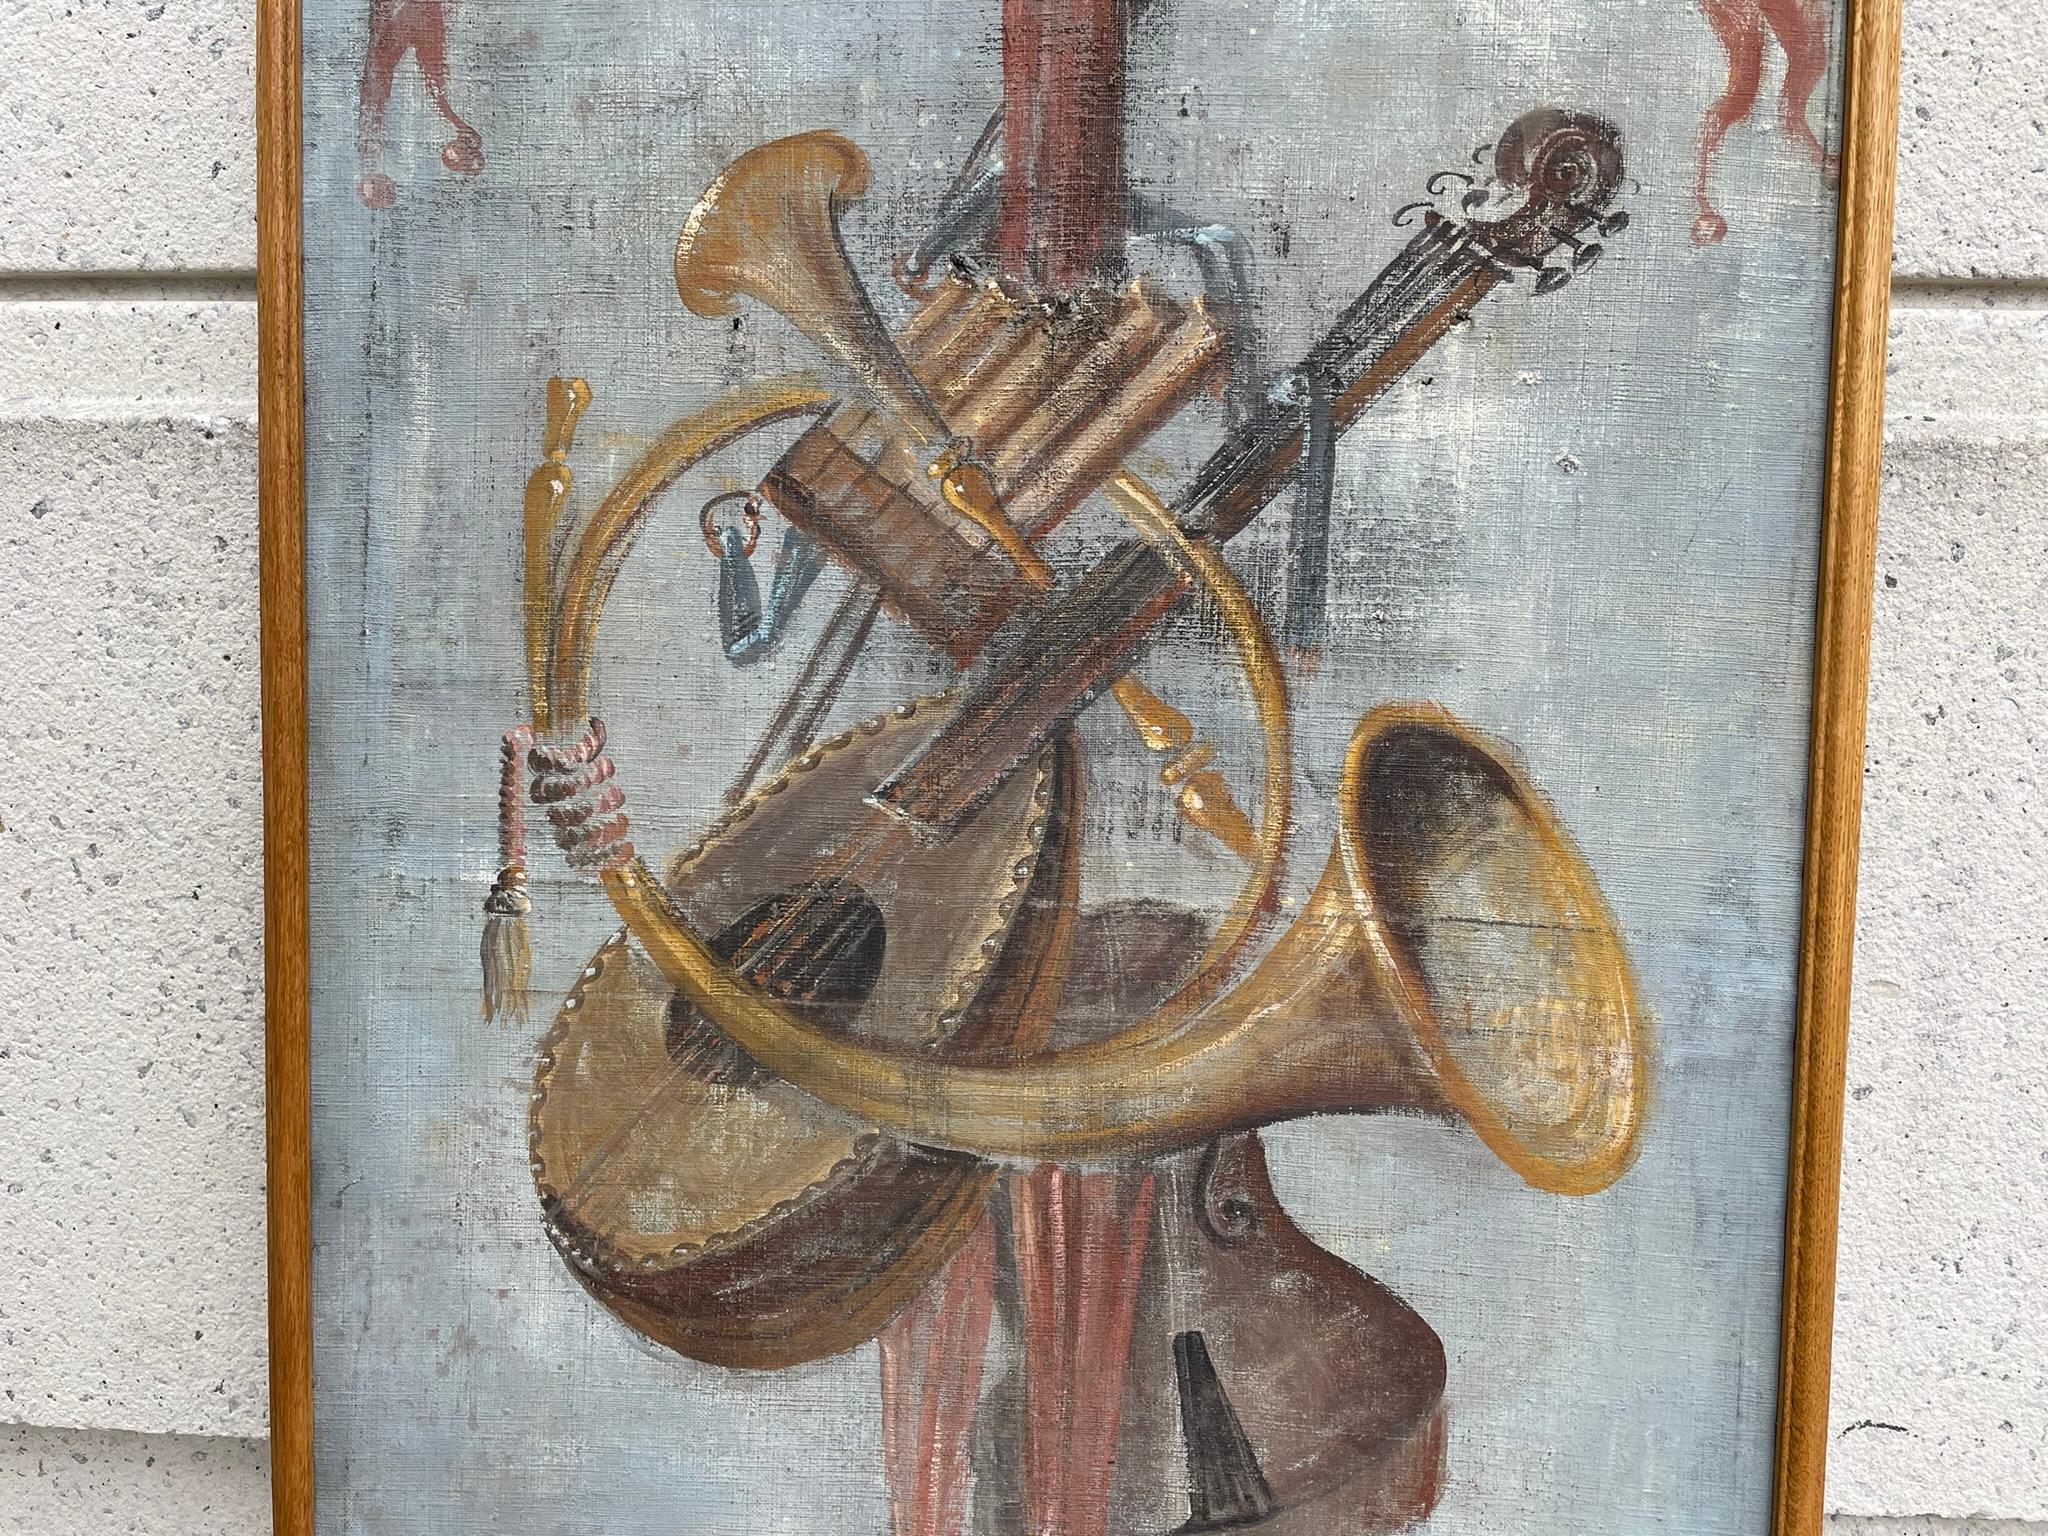 Painted 18th Century Italian Trompe L'Oeil Painting On Canvas Of Musical Instruments For Sale